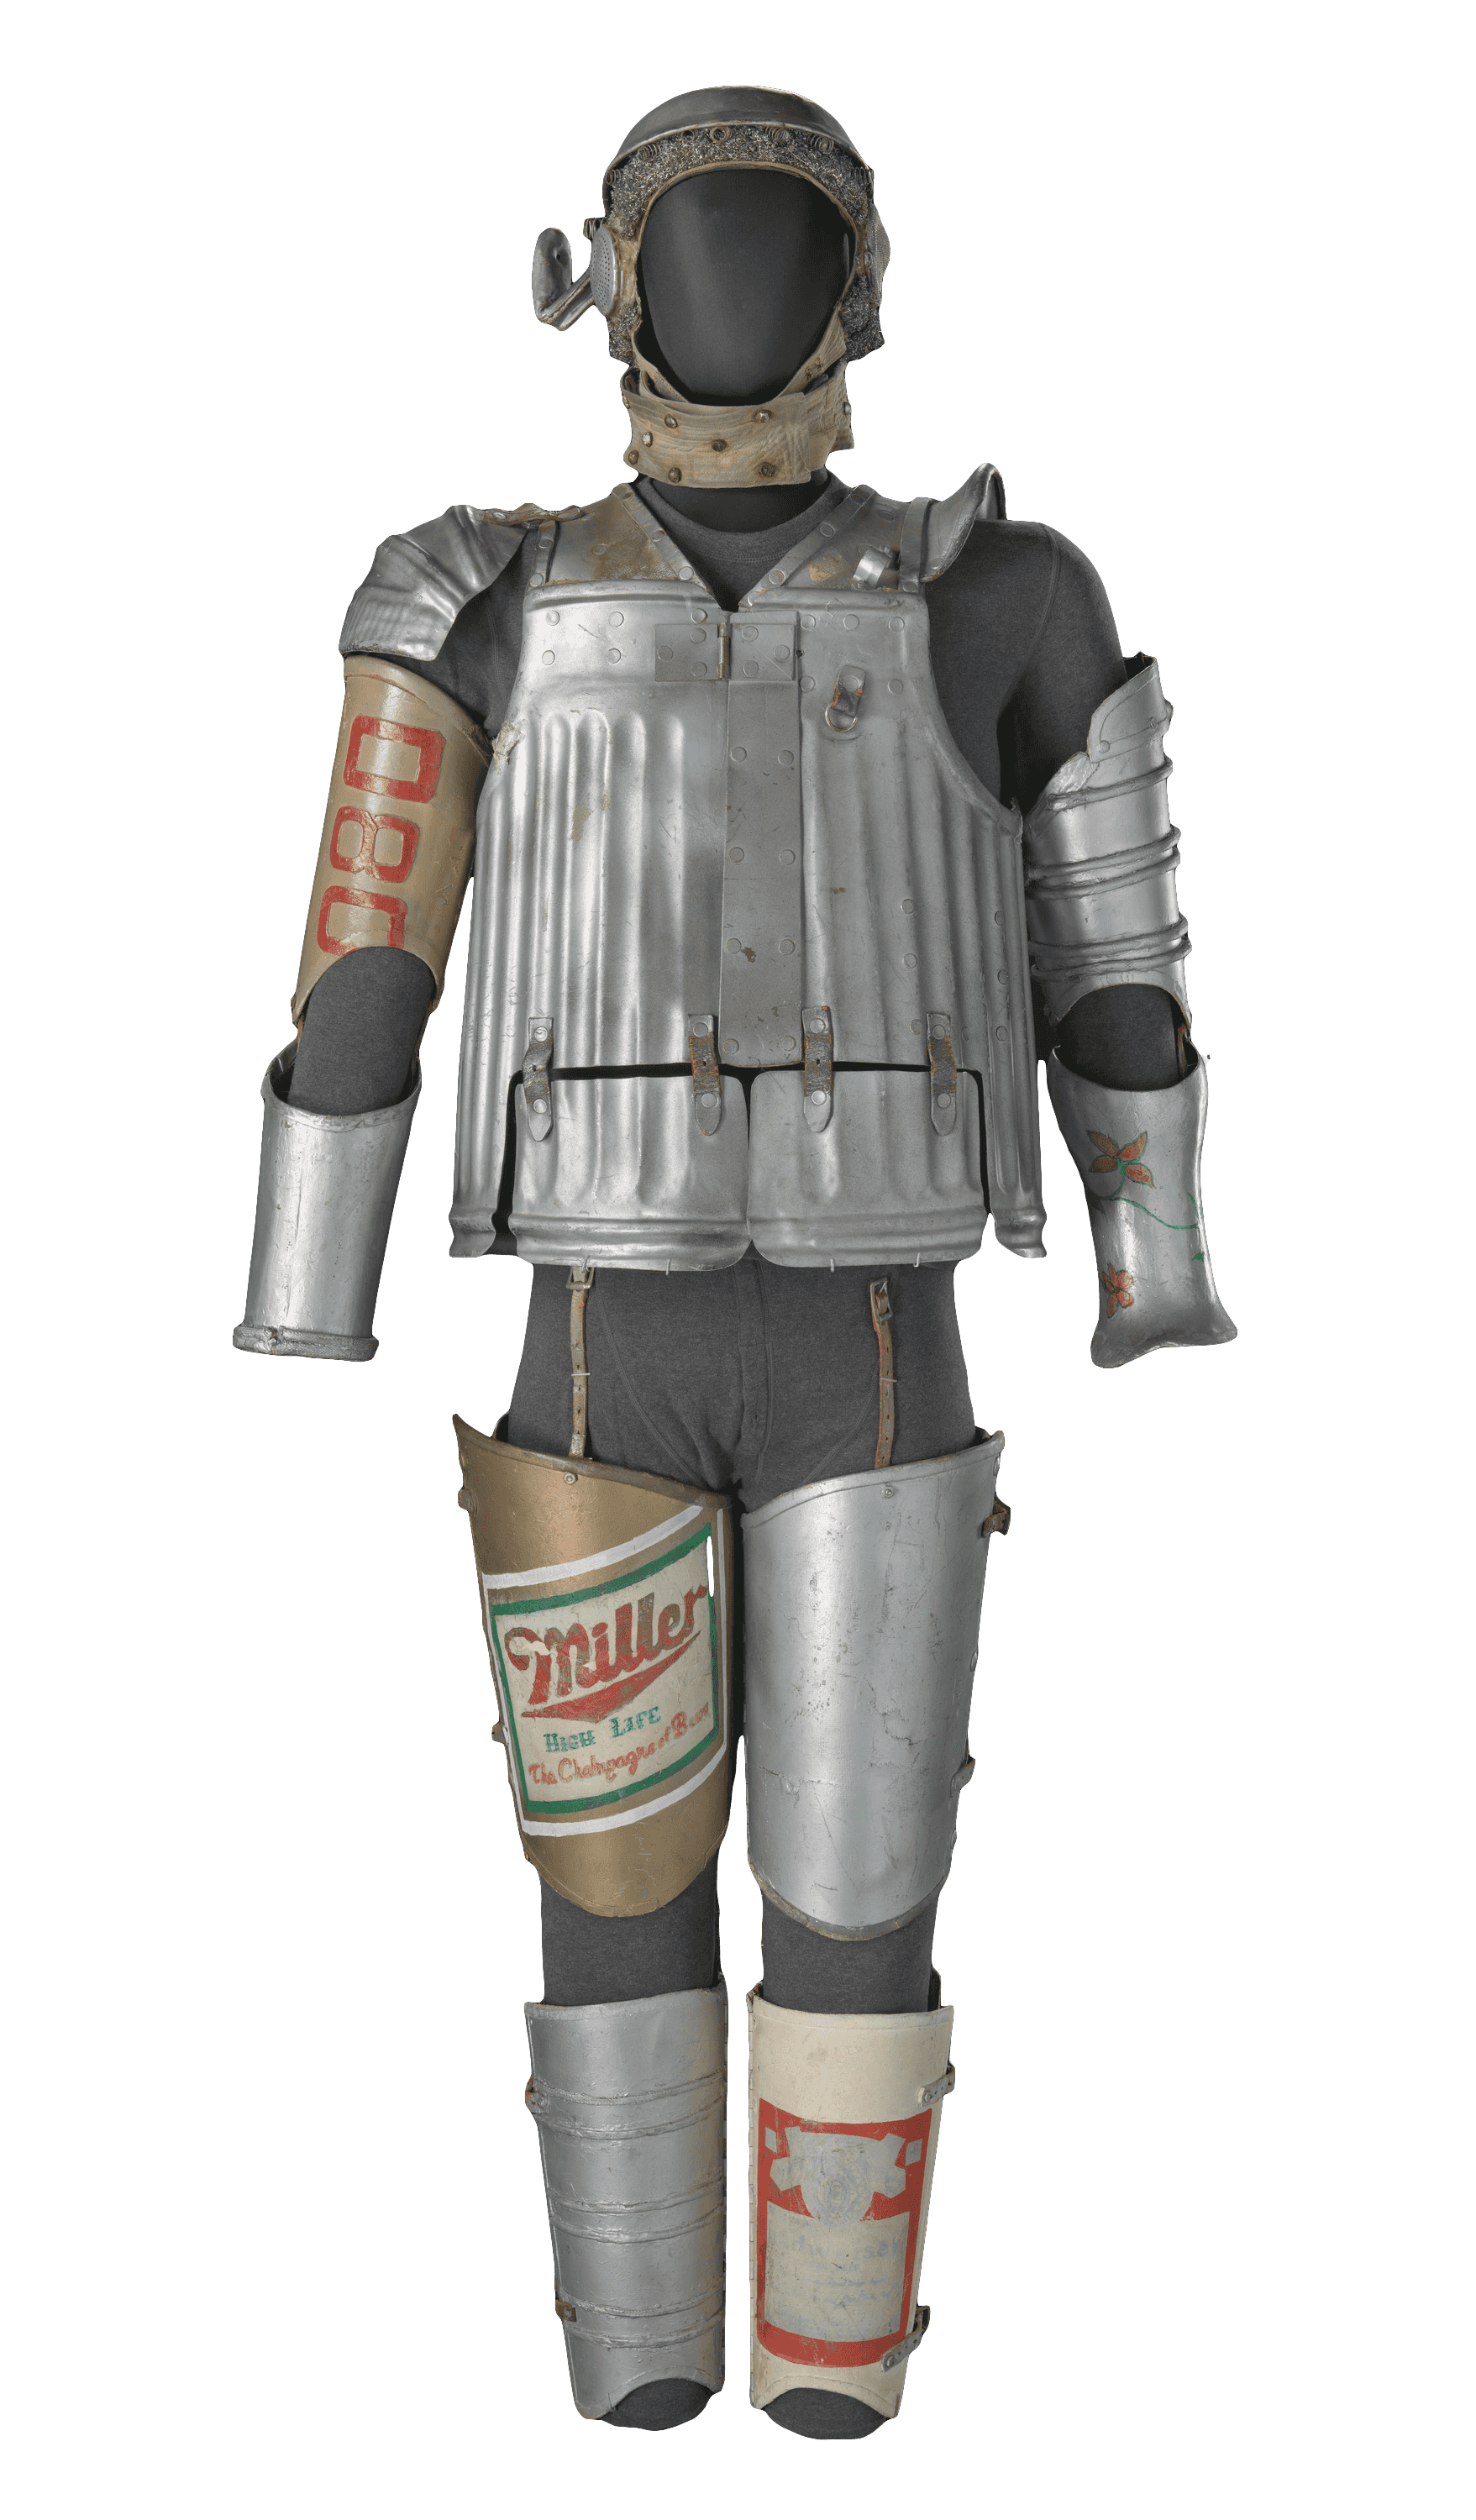 The costume for Tin Man in The Wiz on Broadway is mad of collage looking meta to create a full body suit and helmet.